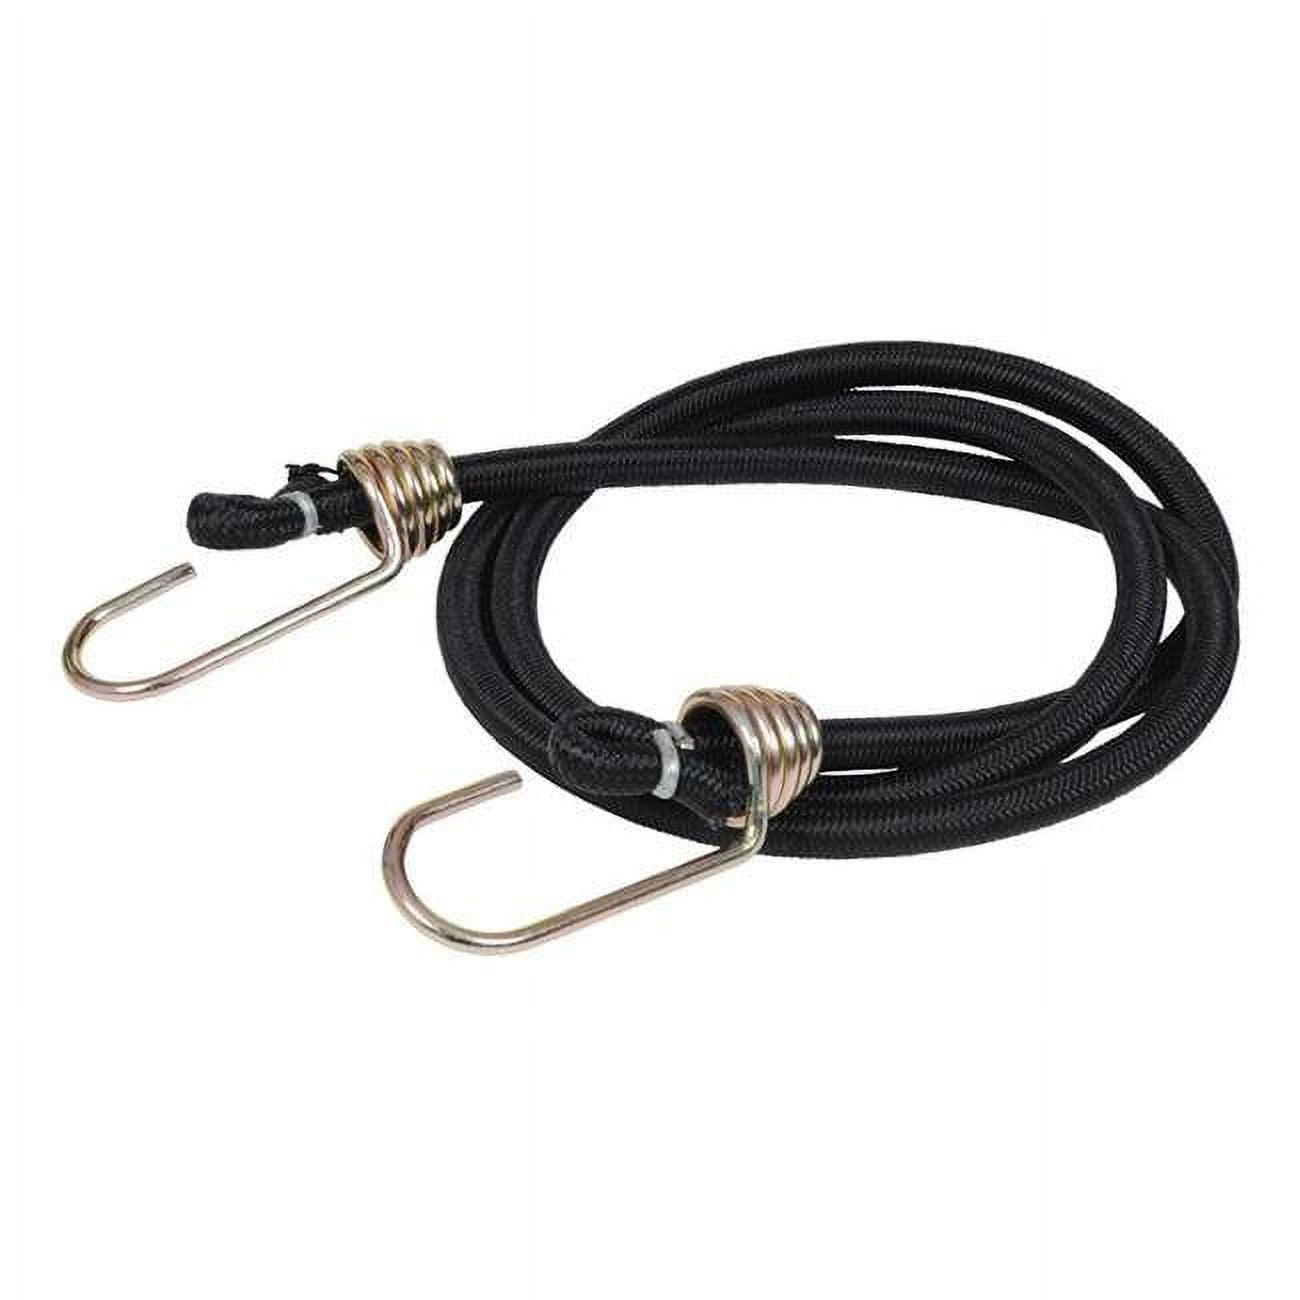 8865735 Black Bungee Cord, 48 X 0.374 In. - Case Of 10